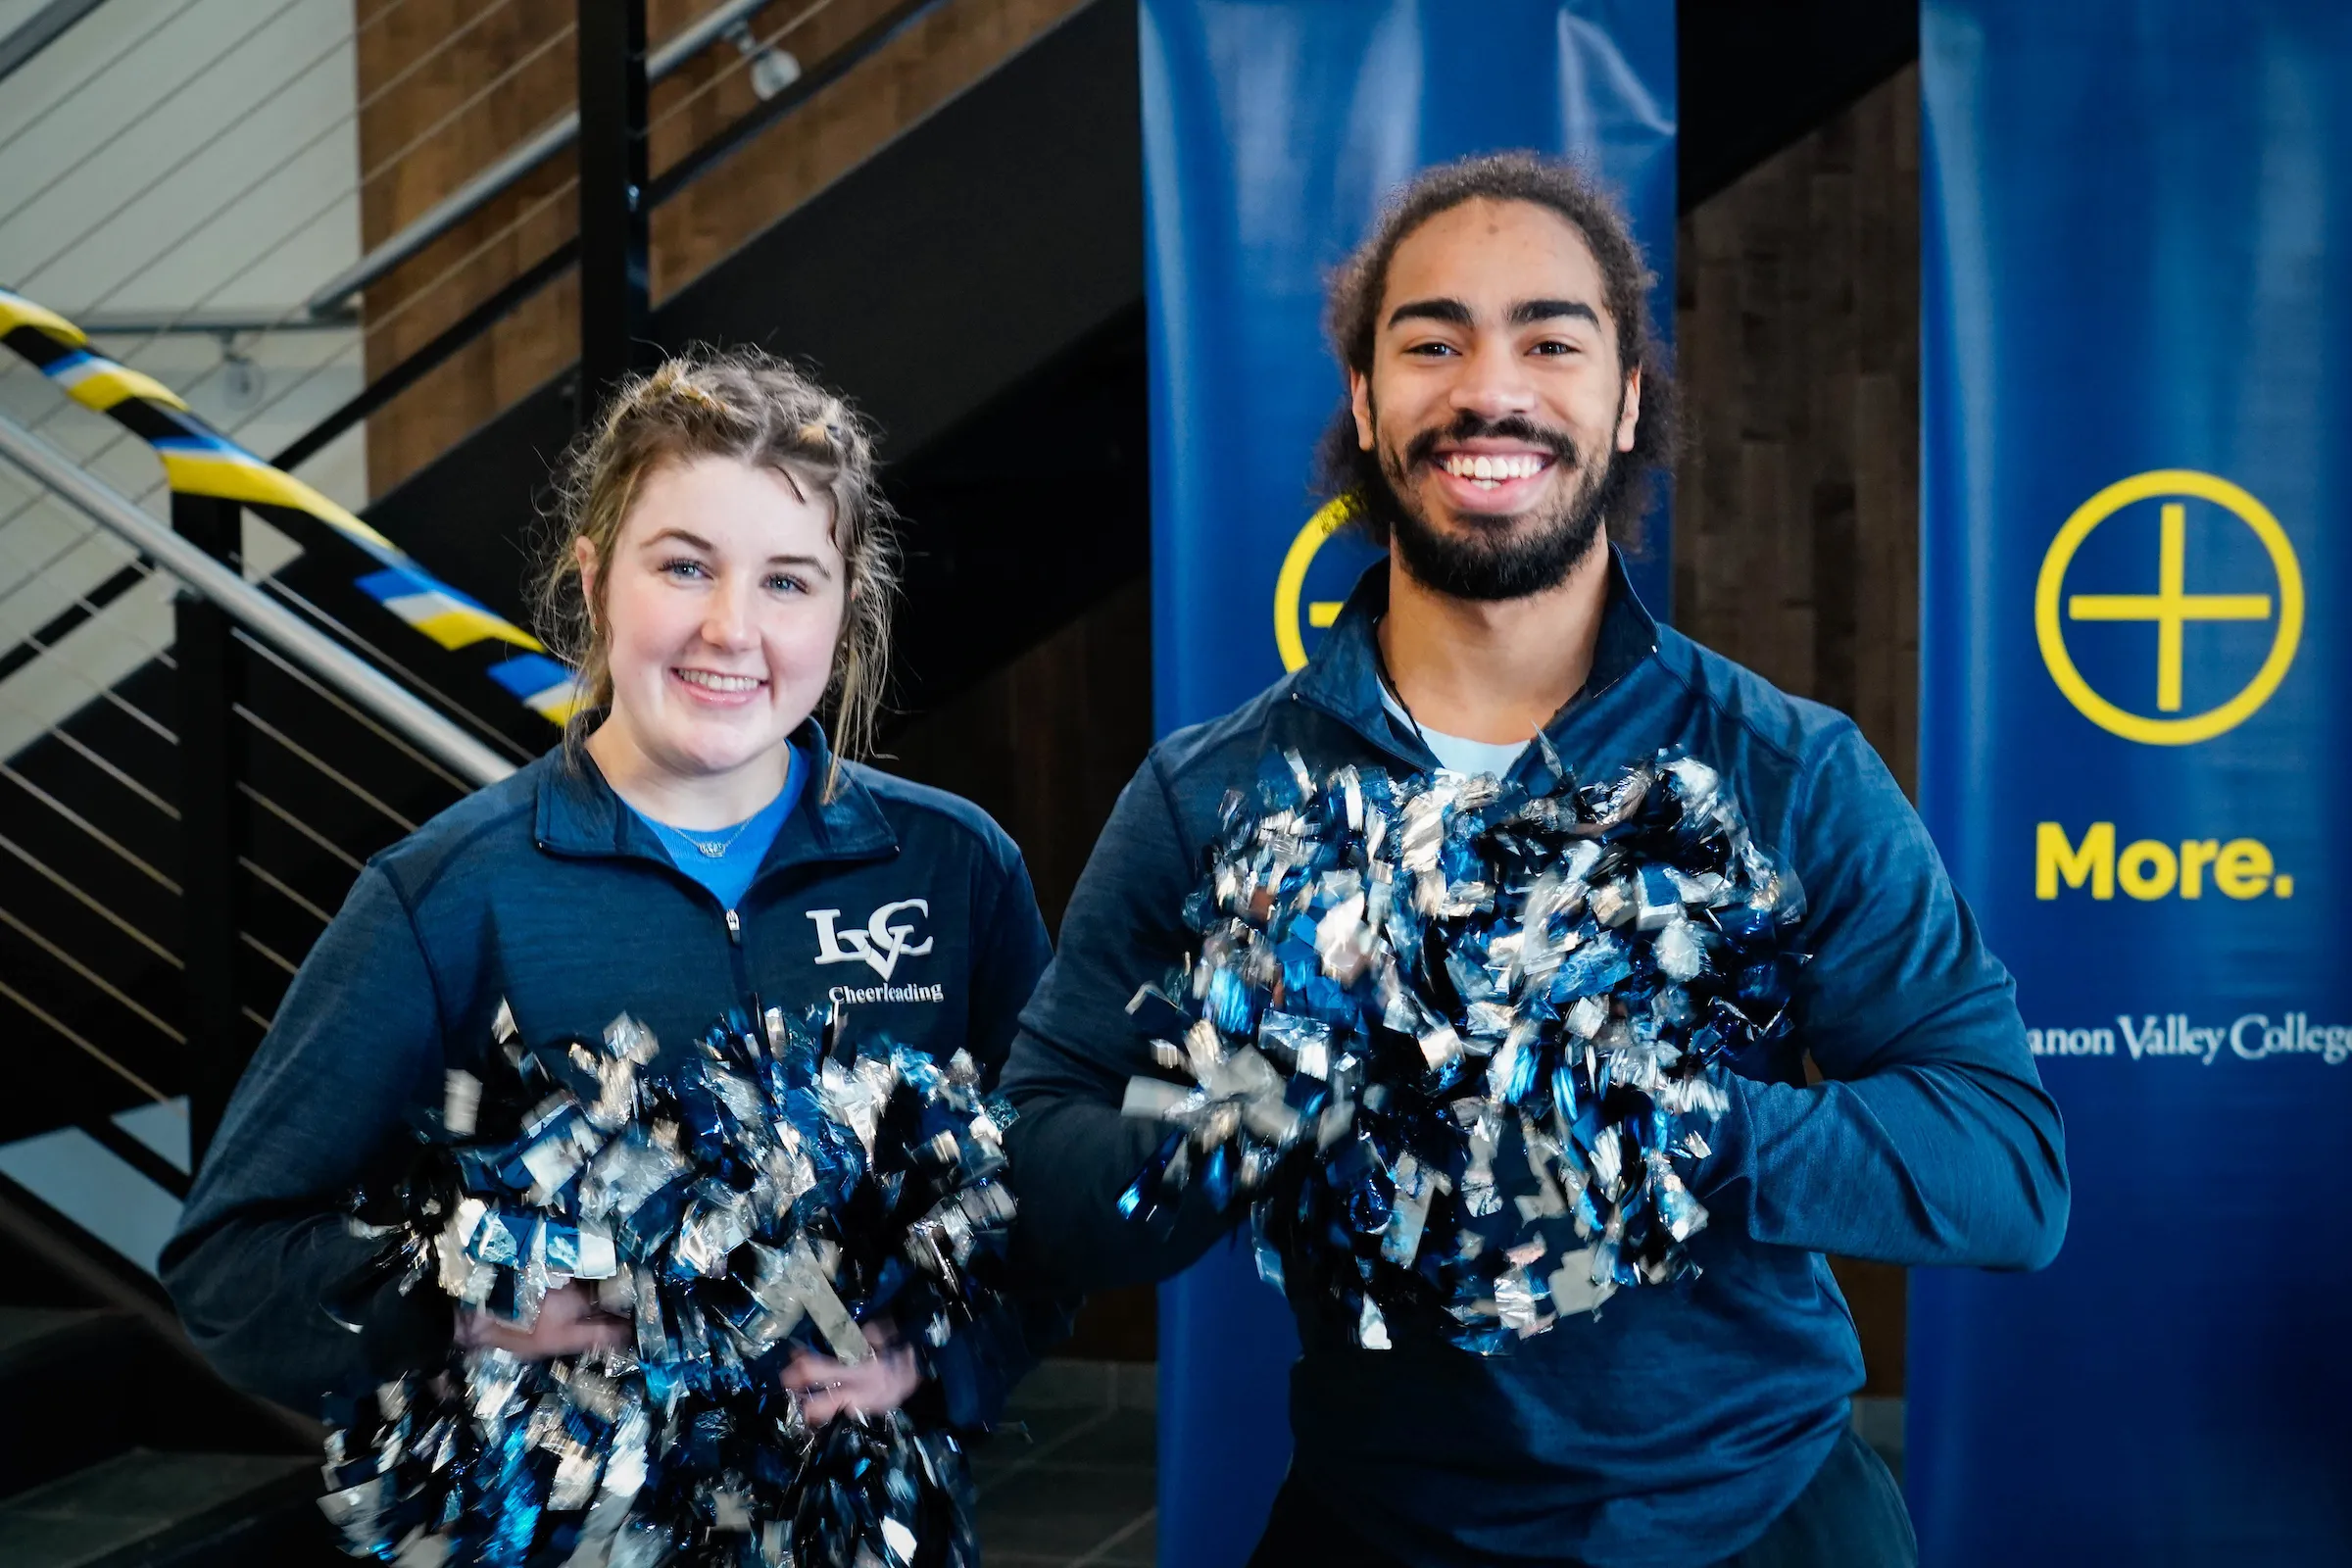 LVC cheerleaders smile with pom poms at LVC Live admitted student event